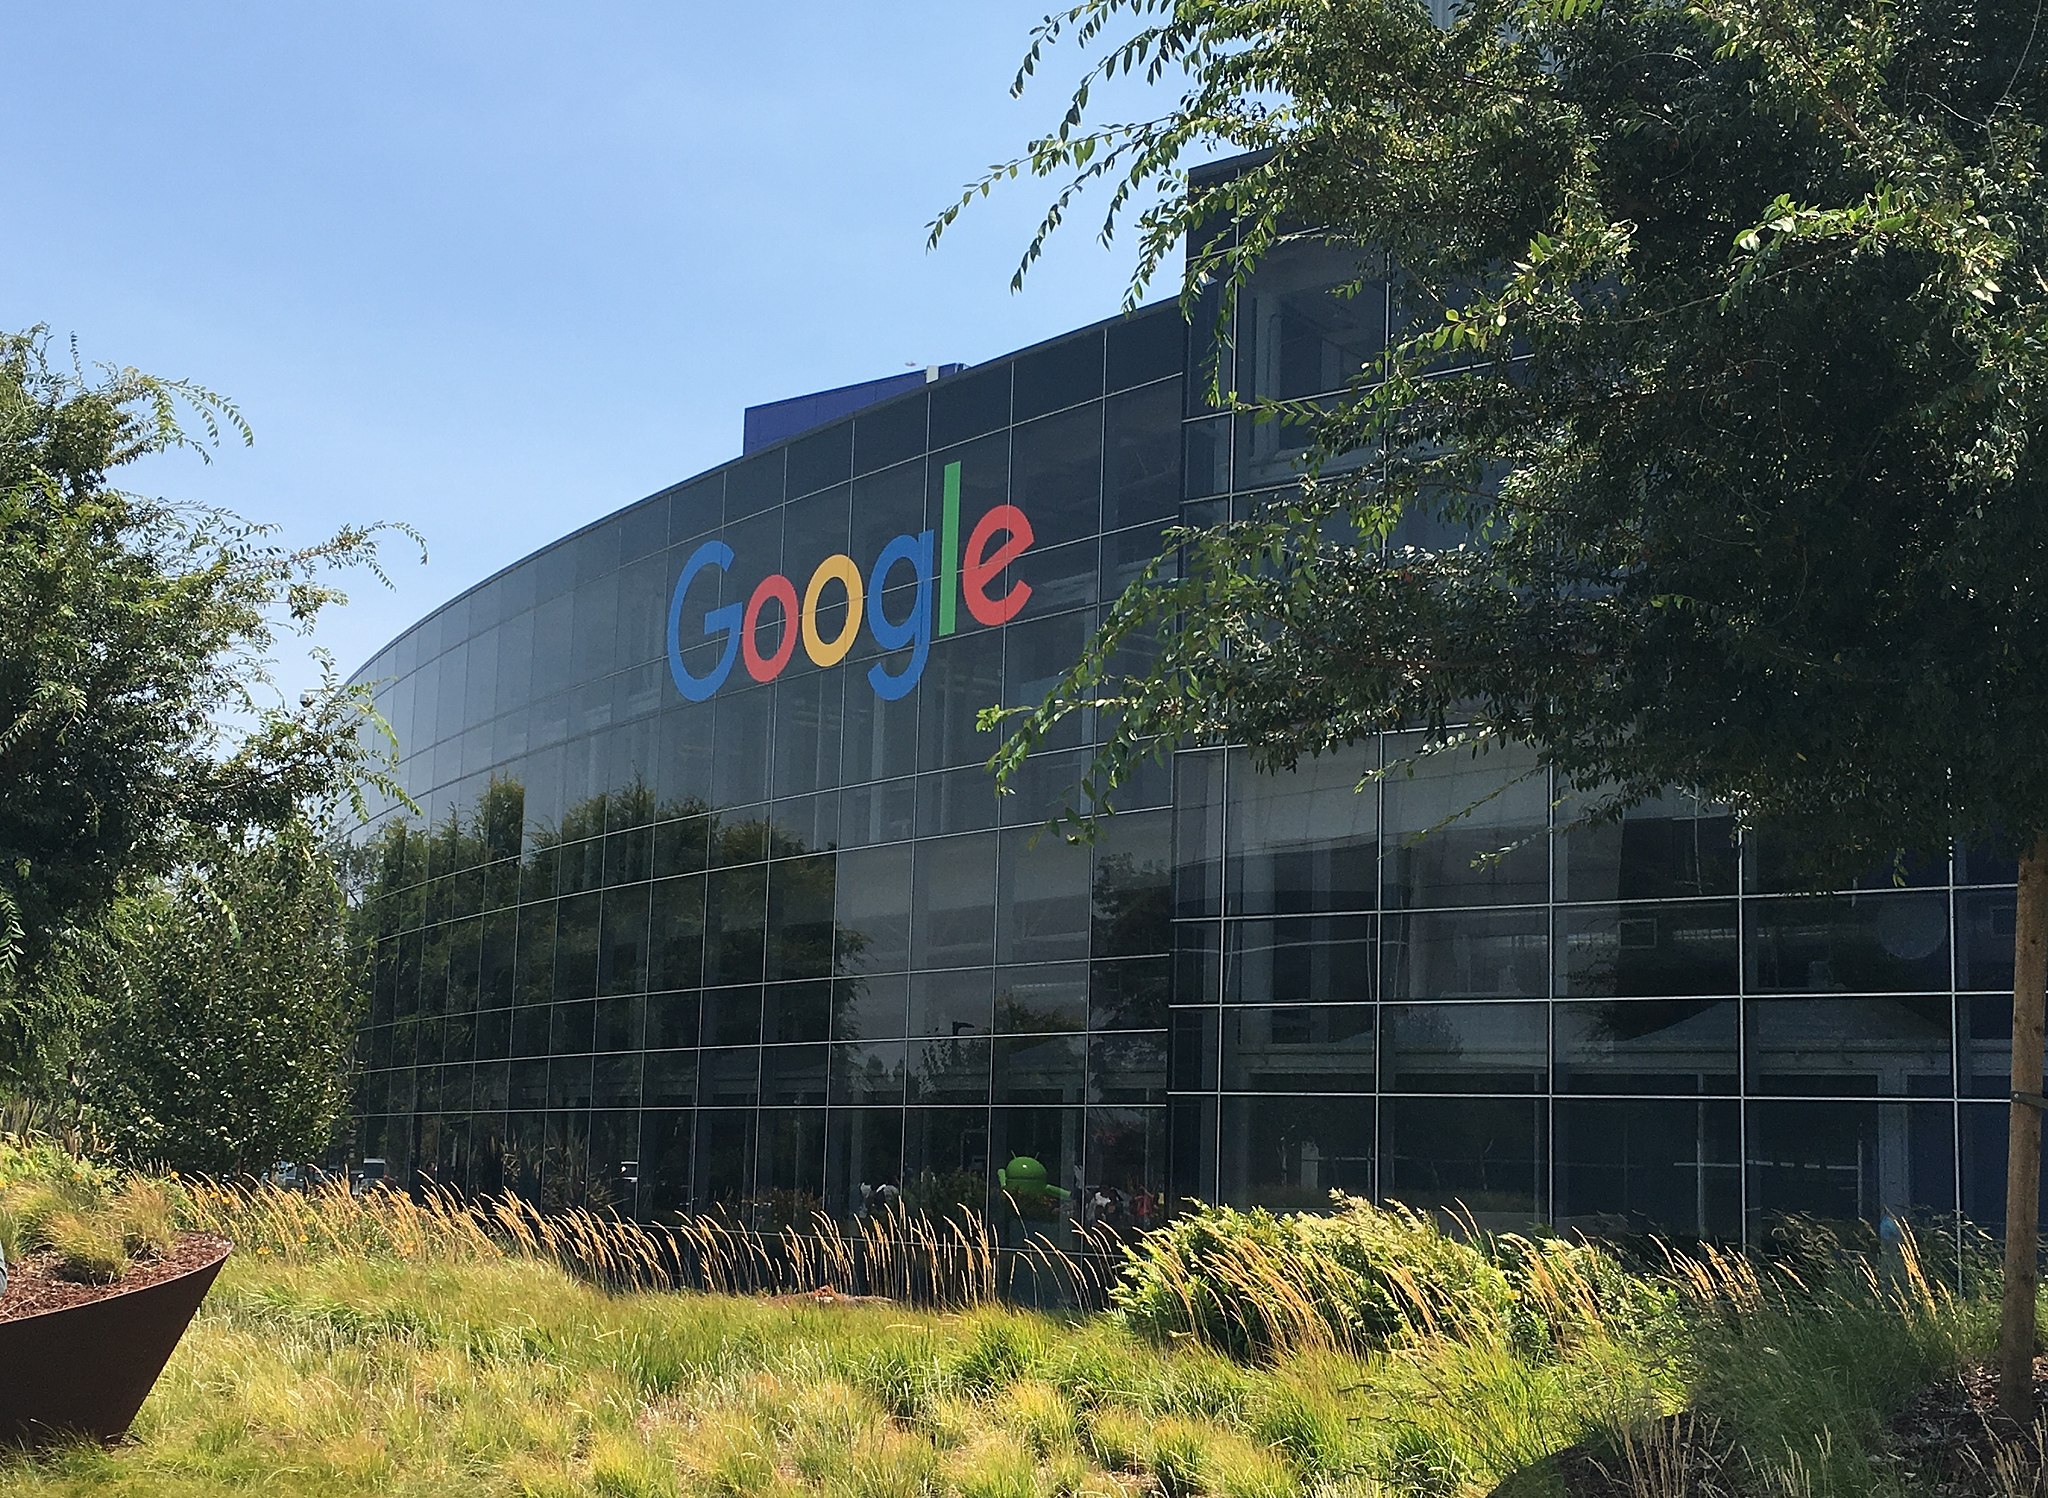 Google headquarters in Mountain View, California, as seen in 2016. Source: The Pancake of Heaven!, CC BY-SA 4.0 <https://creativecommons.org/licenses/by-sa/4.0>, via Wikimedia Commons